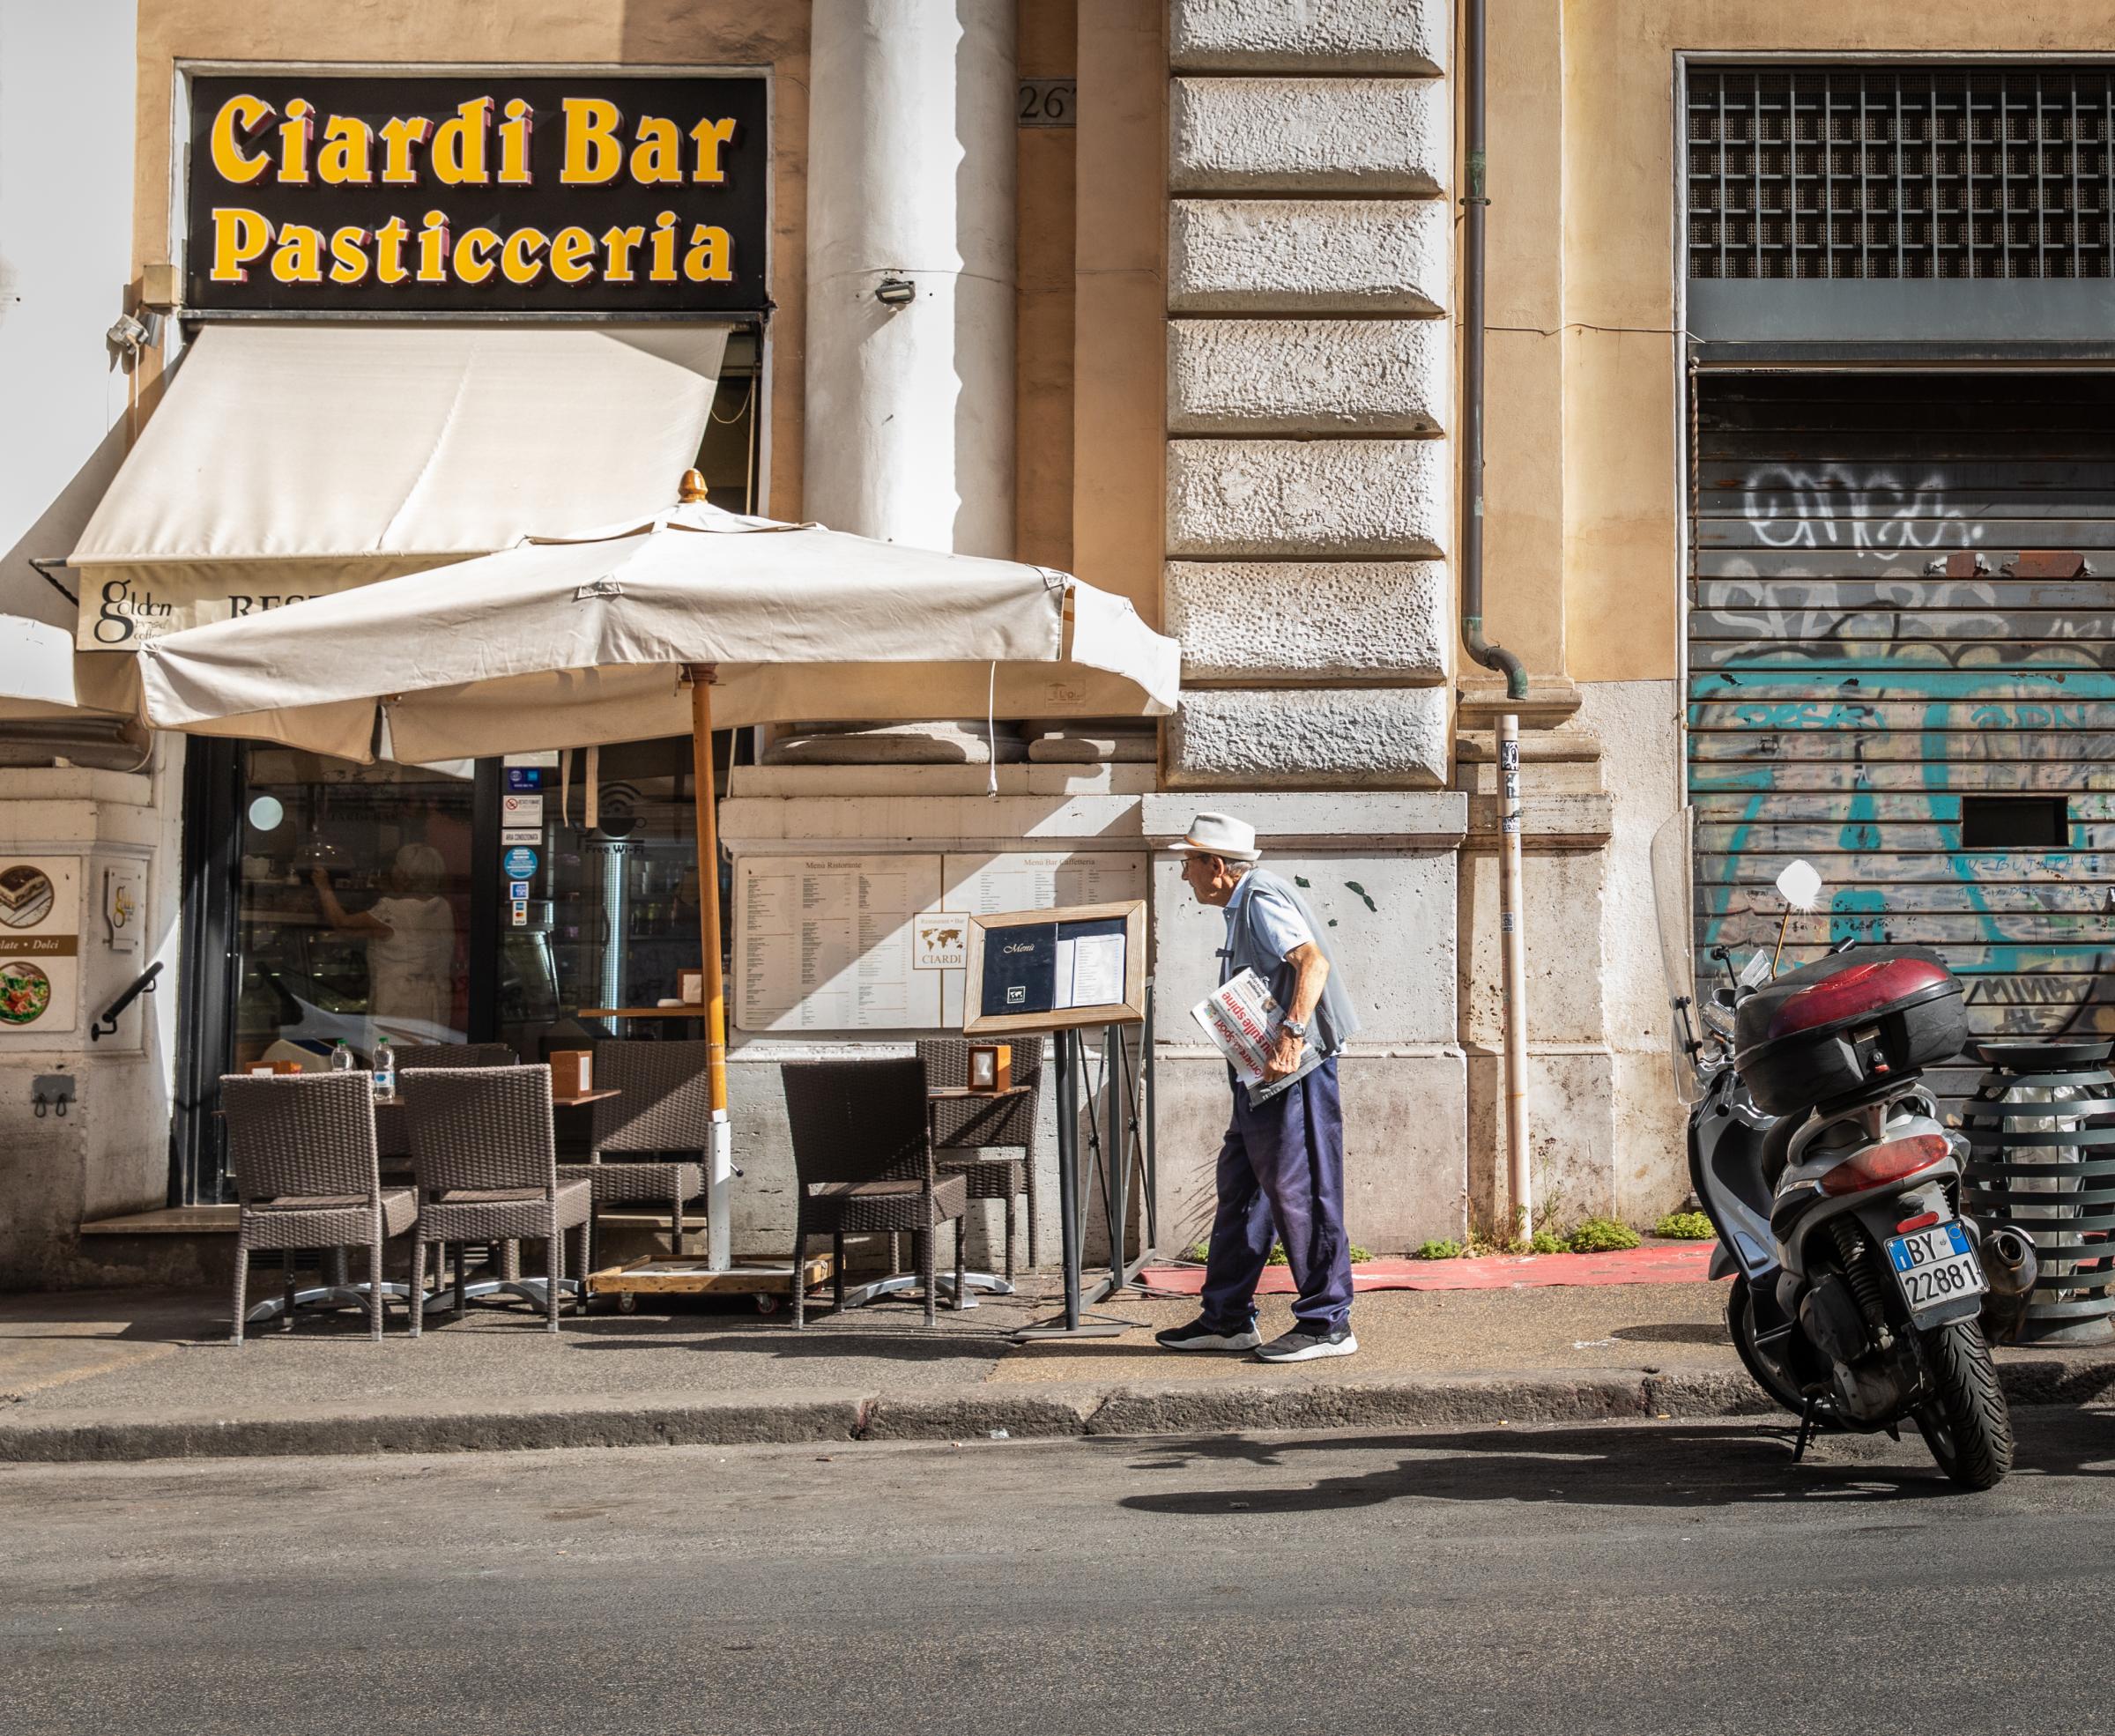 That Bad Boy Rome - A First-timer's Perspective - A man slowly walks to the Ciardi Bar Pasticceria with his newspaper.